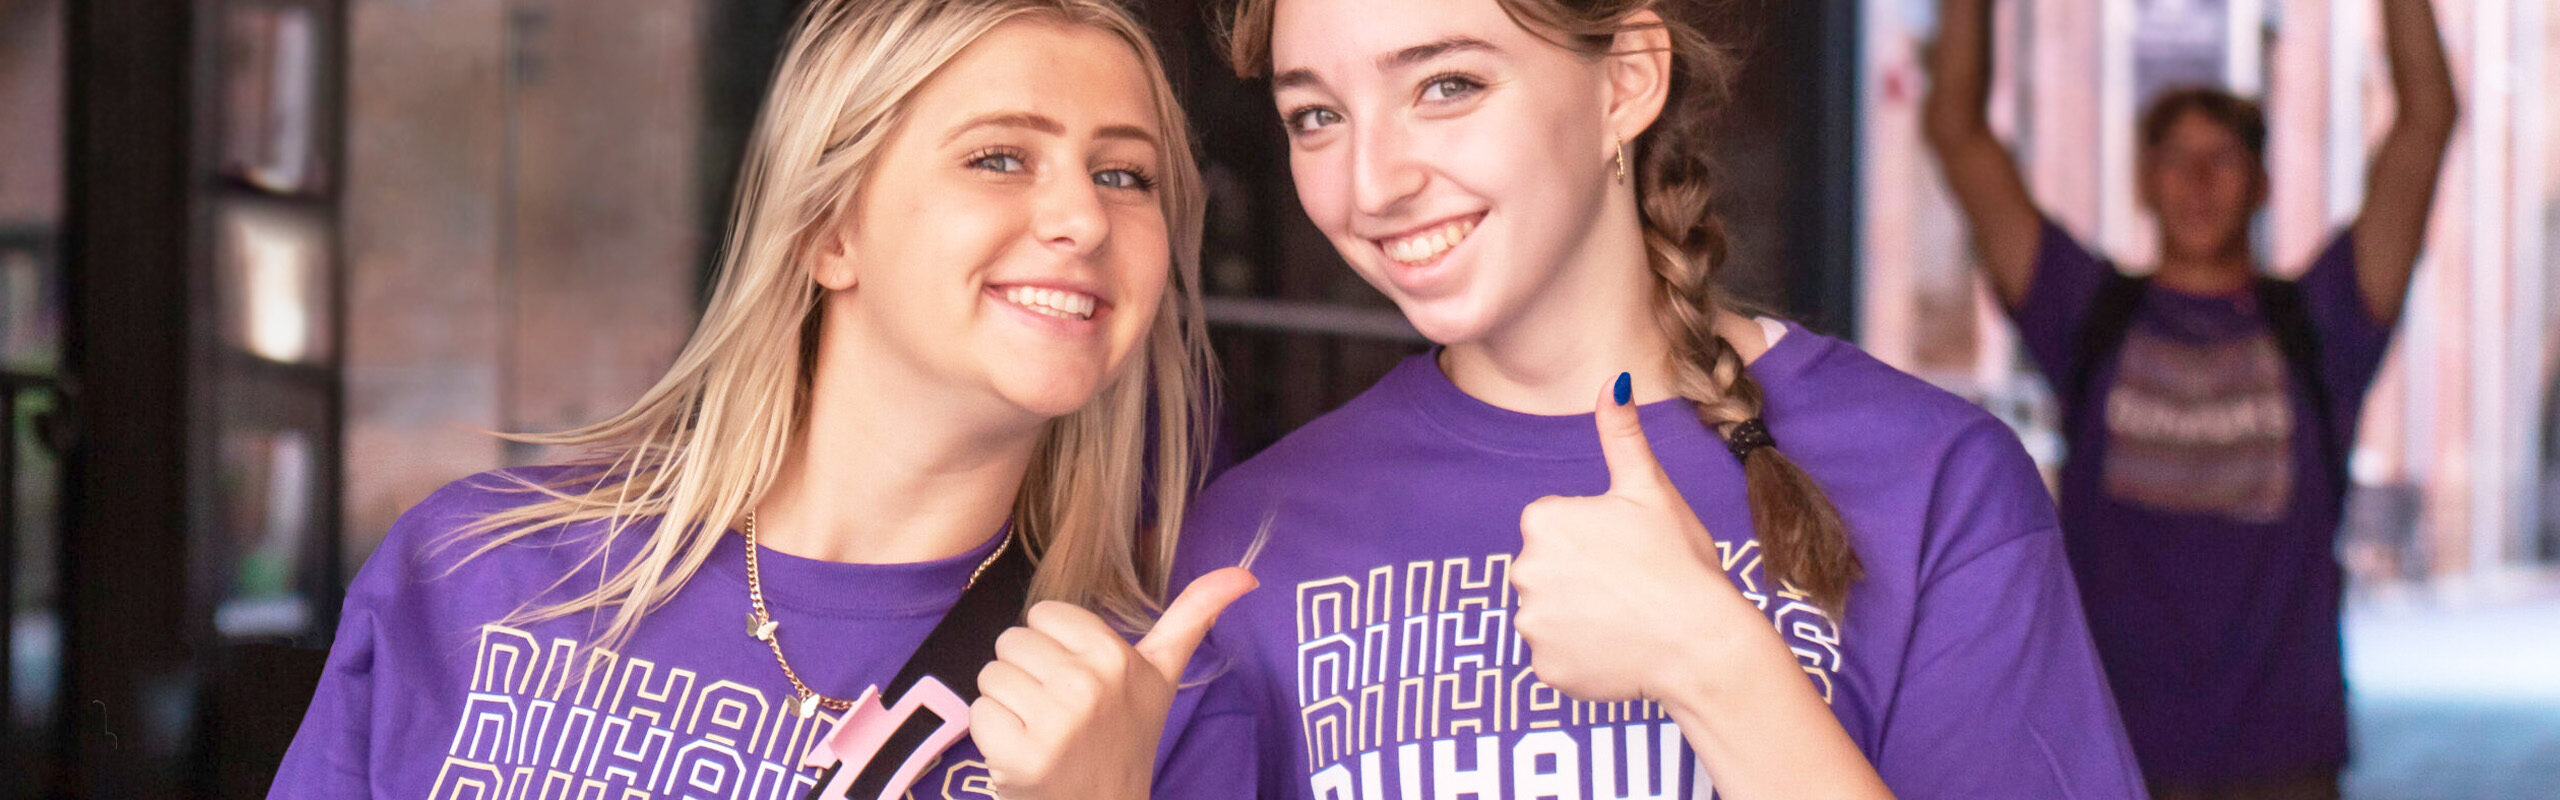 Two Duhawks expressing Duhawk Pride by smiling and giving camera a thumbs up